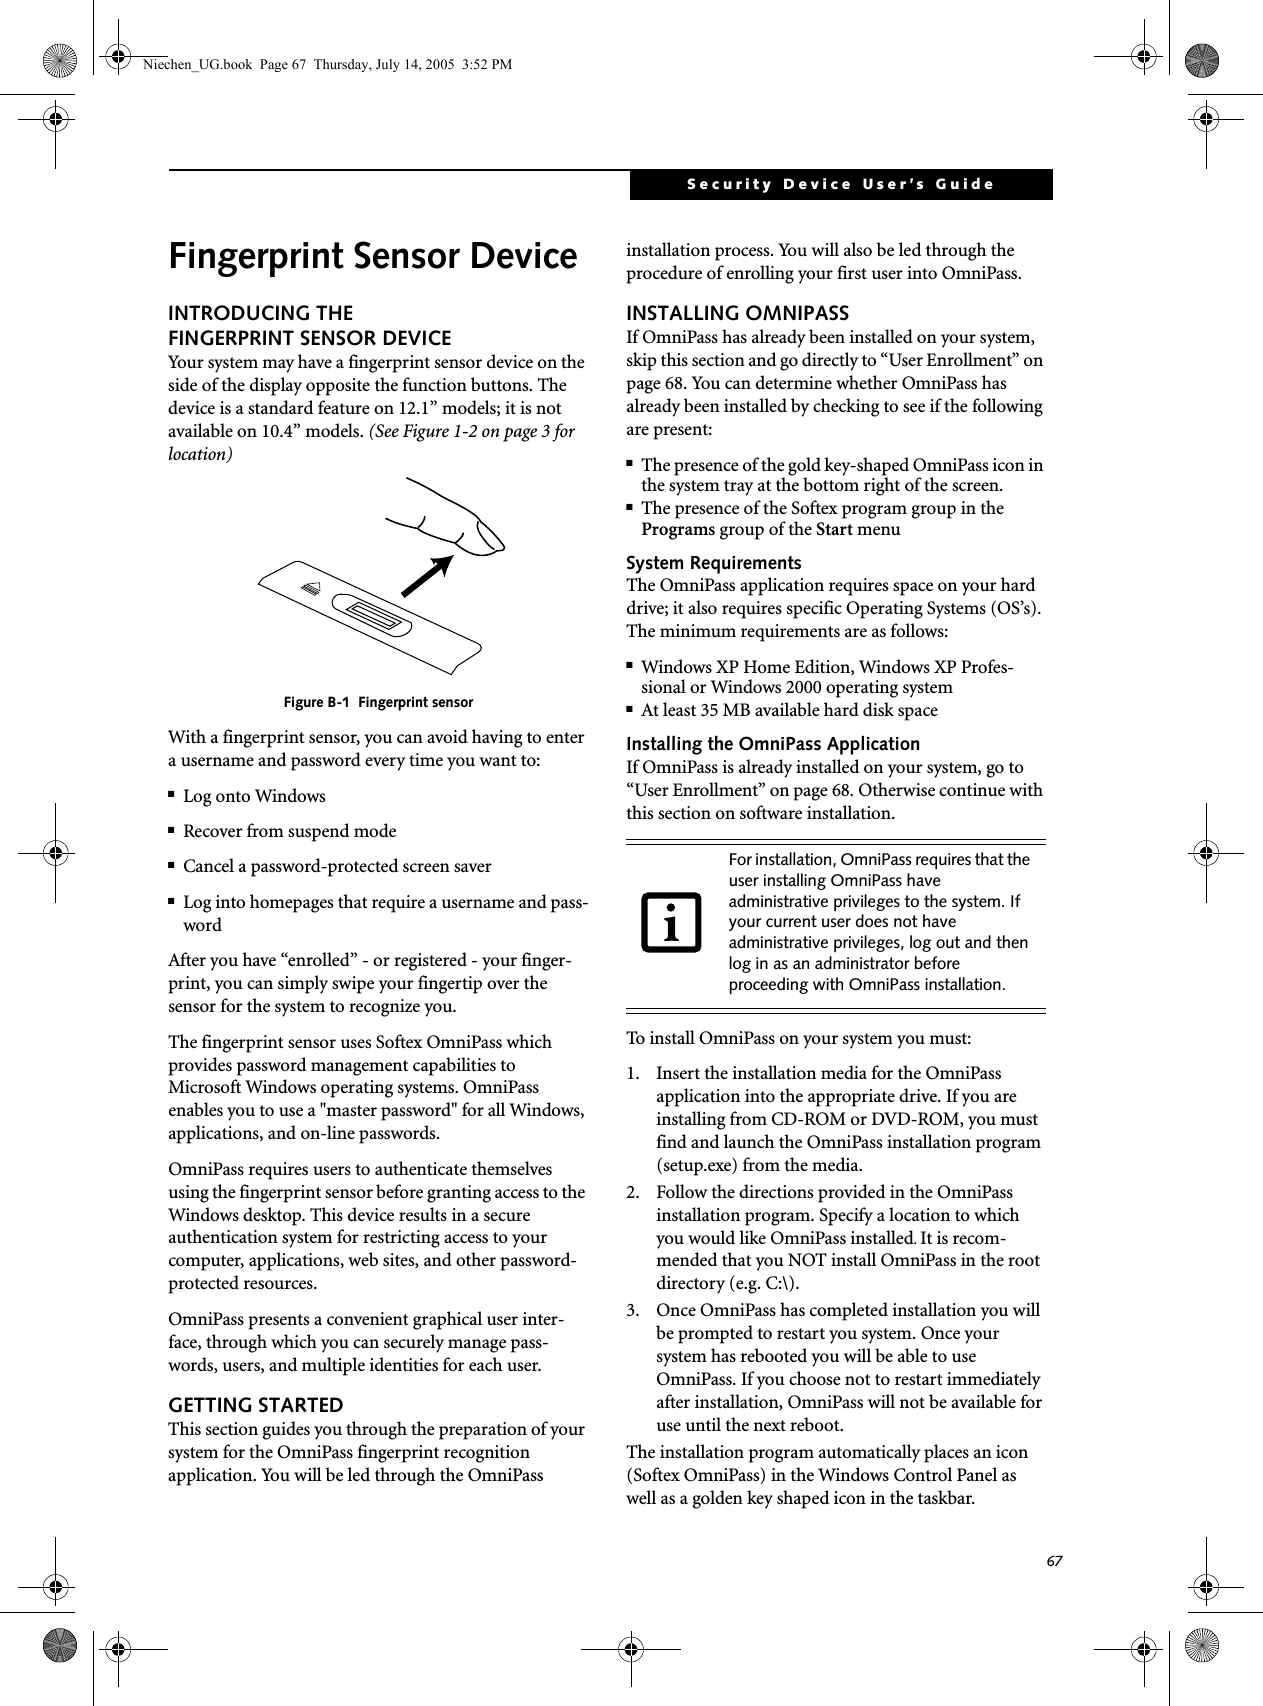 67Security Device User’s GuideFingerprint Sensor DeviceINTRODUCING THE FINGERPRINT SENSOR DEVICEYour system may have a fingerprint sensor device on the side of the display opposite the function buttons. The device is a standard feature on 12.1” models; it is not available on 10.4” models. (See Figure 1-2 on page 3 for location) Figure B-1  Fingerprint sensorWith a fingerprint sensor, you can avoid having to enter a username and password every time you want to:■Log onto Windows■Recover from suspend mode■Cancel a password-protected screen saver■Log into homepages that require a username and pass-wordAfter you have “enrolled” - or registered - your finger-print, you can simply swipe your fingertip over the sensor for the system to recognize you. The fingerprint sensor uses Softex OmniPass which provides password management capabilities to Microsoft Windows operating systems. OmniPass enables you to use a &quot;master password&quot; for all Windows, applications, and on-line passwords. OmniPass requires users to authenticate themselves using the fingerprint sensor before granting access to the Windows desktop. This device results in a secure authentication system for restricting access to your computer, applications, web sites, and other password-protected resources.OmniPass presents a convenient graphical user inter-face, through which you can securely manage pass-words, users, and multiple identities for each user.GETTING STARTEDThis section guides you through the preparation of your system for the OmniPass fingerprint recognition application. You will be led through the OmniPass installation process. You will also be led through the procedure of enrolling your first user into OmniPass. INSTALLING OMNIPASSIf OmniPass has already been installed on your system, skip this section and go directly to “User Enrollment” on page 68. You can determine whether OmniPass has already been installed by checking to see if the following are present:■The presence of the gold key-shaped OmniPass icon in the system tray at the bottom right of the screen.■The presence of the Softex program group in the Programs group of the Start menuSystem RequirementsThe OmniPass application requires space on your hard drive; it also requires specific Operating Systems (OS’s). The minimum requirements are as follows:■Windows XP Home Edition, Windows XP Profes-sional or Windows 2000 operating system■At least 35 MB available hard disk spaceInstalling the OmniPass ApplicationIf OmniPass is already installed on your system, go to “User Enrollment” on page 68. Otherwise continue with this section on software installation.To install OmniPass on your system you must:1.  Insert the installation media for the OmniPass application into the appropriate drive. If you are installing from CD-ROM or DVD-ROM, you must find and launch the OmniPass installation program (setup.exe) from the media.2.  Follow the directions provided in the OmniPass installation program. Specify a location to which you would like OmniPass installed. It is recom-mended that you NOT install OmniPass in the root directory (e.g. C:\). 3.  Once OmniPass has completed installation you will be prompted to restart you system. Once your system has rebooted you will be able to use OmniPass. If you choose not to restart immediately after installation, OmniPass will not be available for use until the next reboot.The installation program automatically places an icon (Softex OmniPass) in the Windows Control Panel as well as a golden key shaped icon in the taskbar. For installation, OmniPass requires that the user installing OmniPass have administrative privileges to the system. If your current user does not have administrative privileges, log out and then log in as an administrator before proceeding with OmniPass installation.Niechen_UG.book  Page 67  Thursday, July 14, 2005  3:52 PM